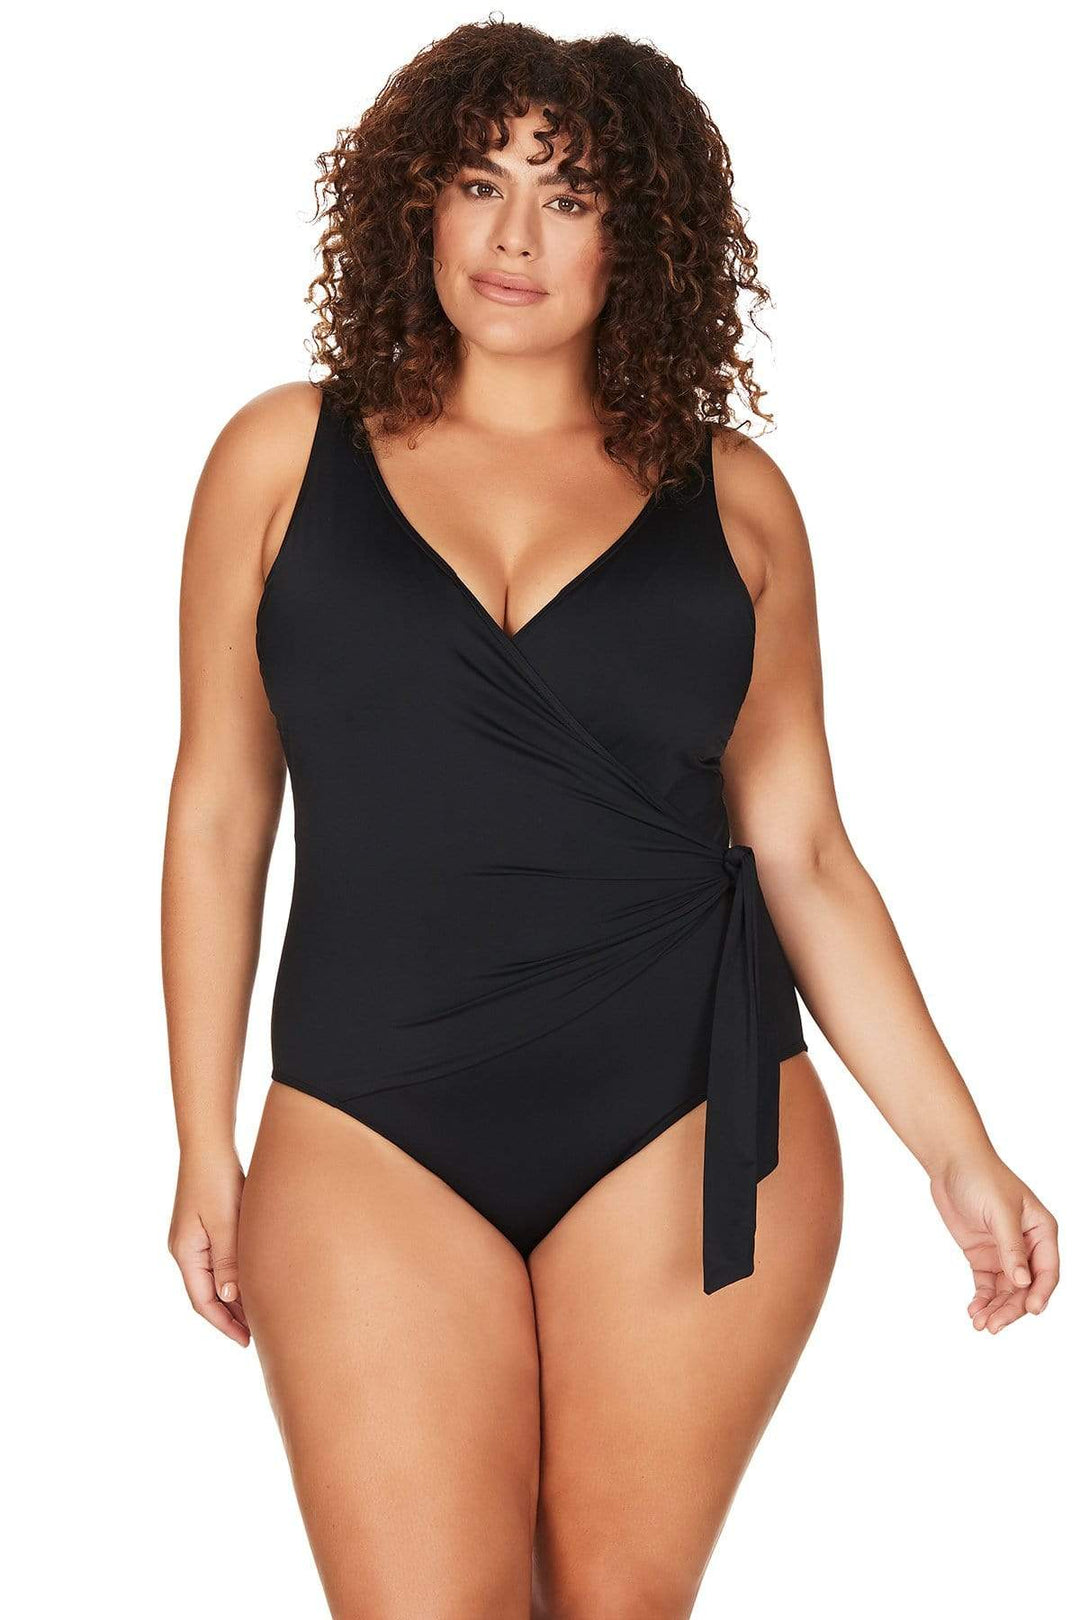 Peroptimist Women's One Piece Swimsuit, Plus Size Bikini Swimsuit, Built-in Bra  Made with Soft and Environment-friendly Material, Make You Feel Free  Without Bound GREEN 2XL 